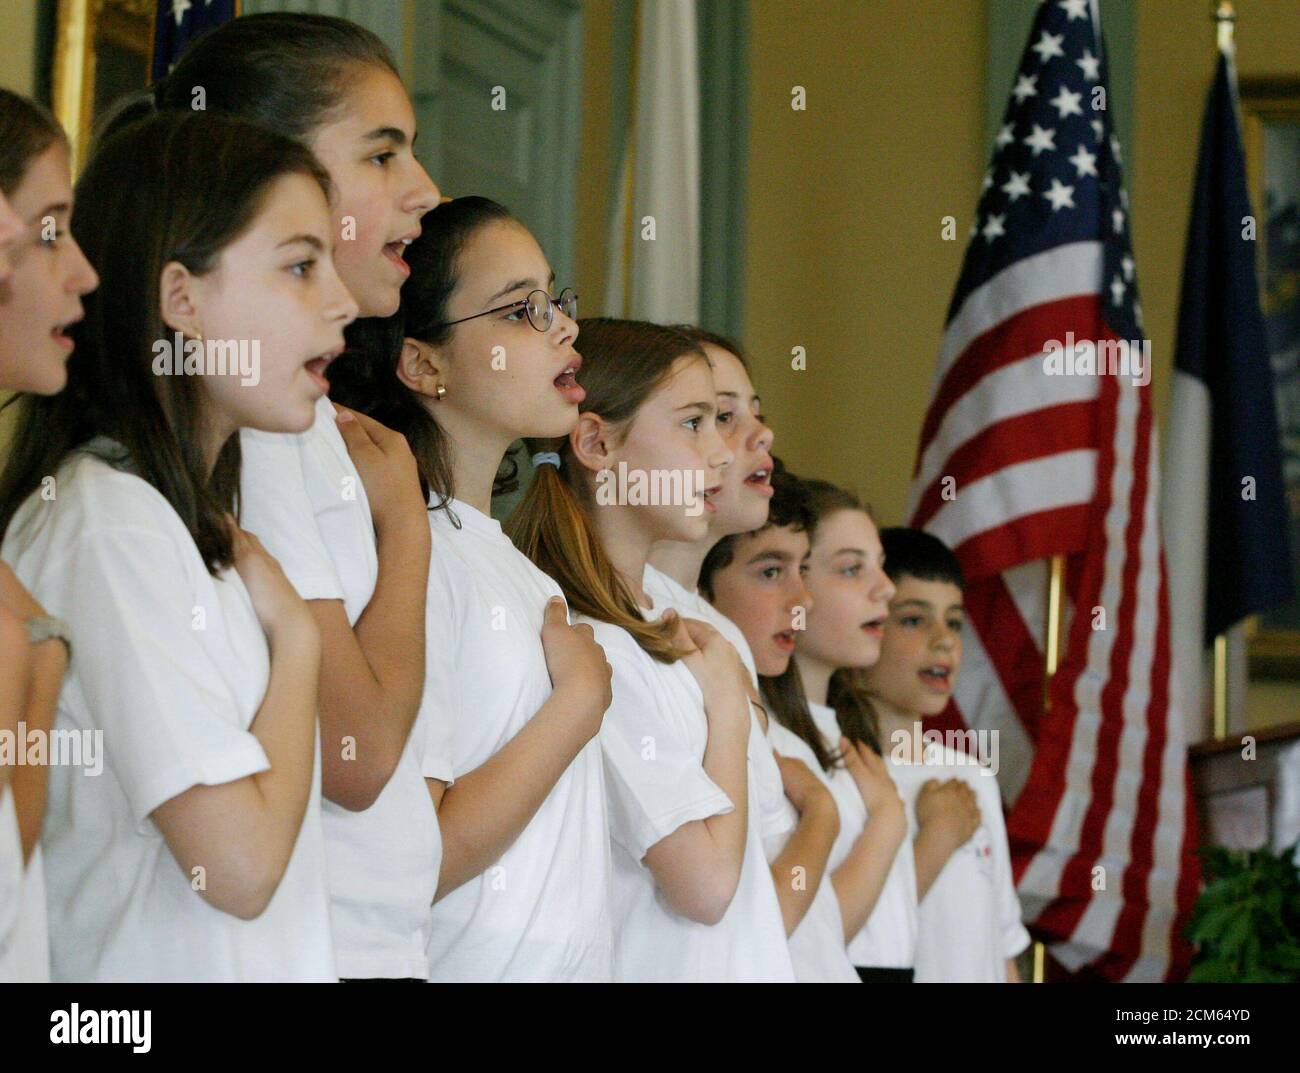 Schoolchildren from the French-American 'Ecole Bilingue/International School of Boston' sing the French and United States national anthems as they stand in front of the countries flags at ceremonies honoring the Marquis de Lafayette, a French General and politician who became a hero in the American revolutionary war, inside the Massachusetts Statehouse in Boston, May 20, 2003. French and local officials joined together on the 169th anniversary of Lafayette's death to reassert the common democratic values of the two countries despite recent diplomatic and military policy differences. REUTERS/Ji Stock Photo